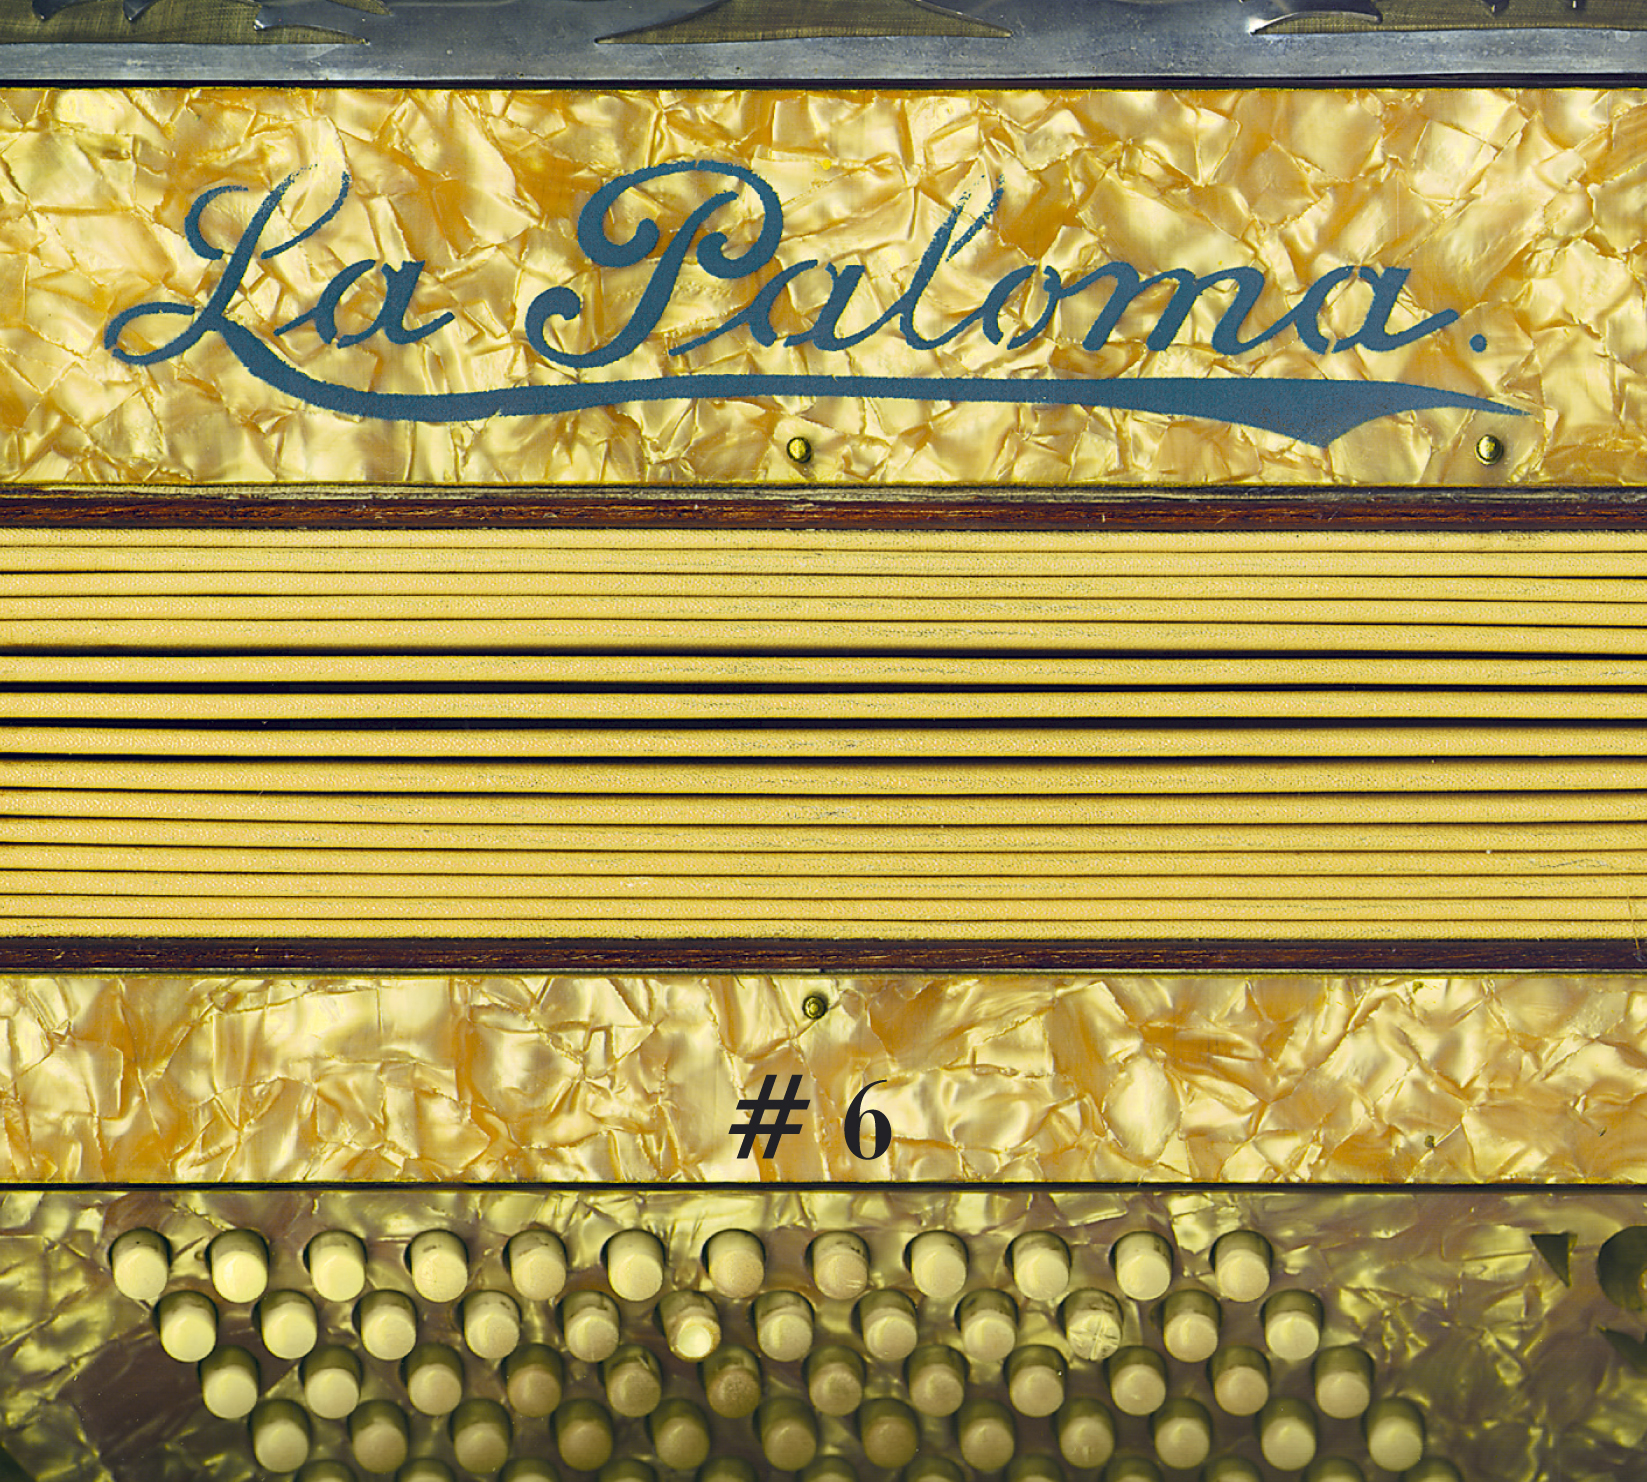 La Paloma - One Song for all Worlds - Vol. VI